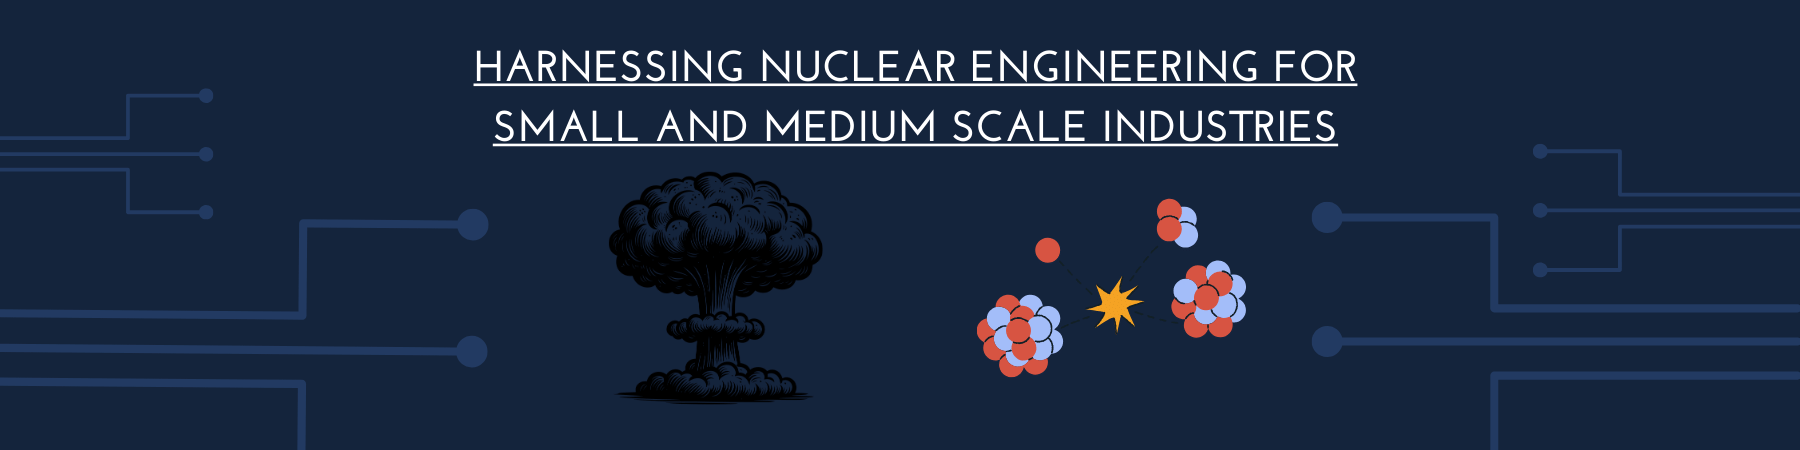 Harnessing Nuclear Engineering for Small and Medium Scale Industries